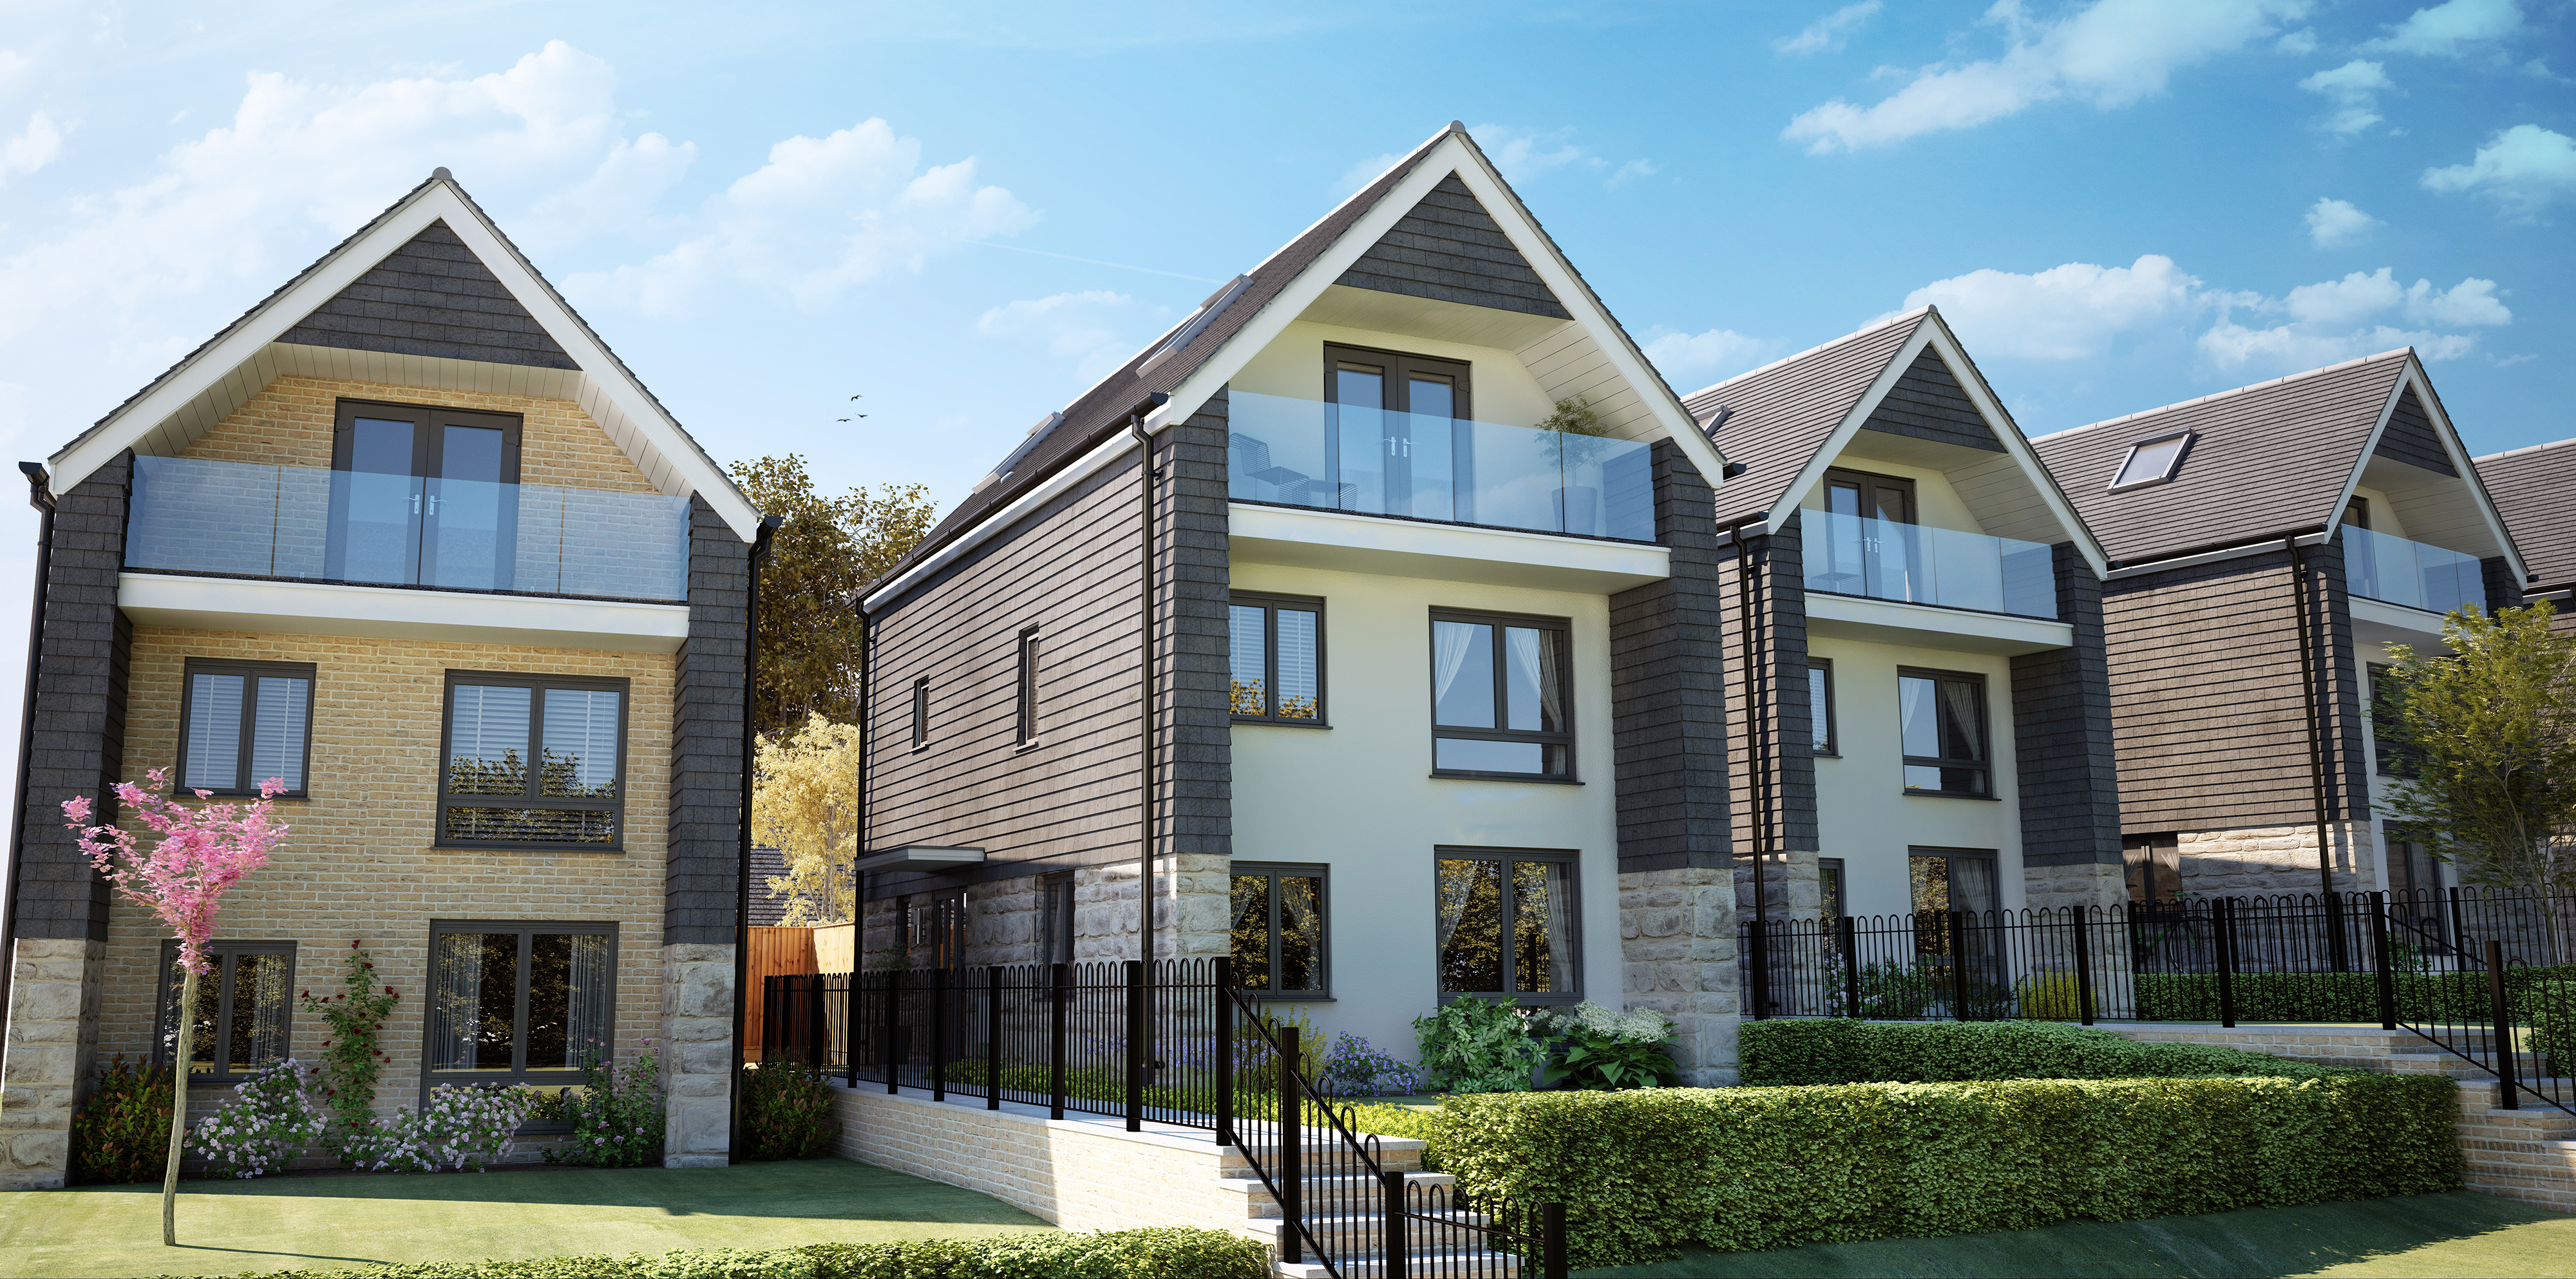 First chance to buy a ‘dream home’ at eagerly awaited development in Callington